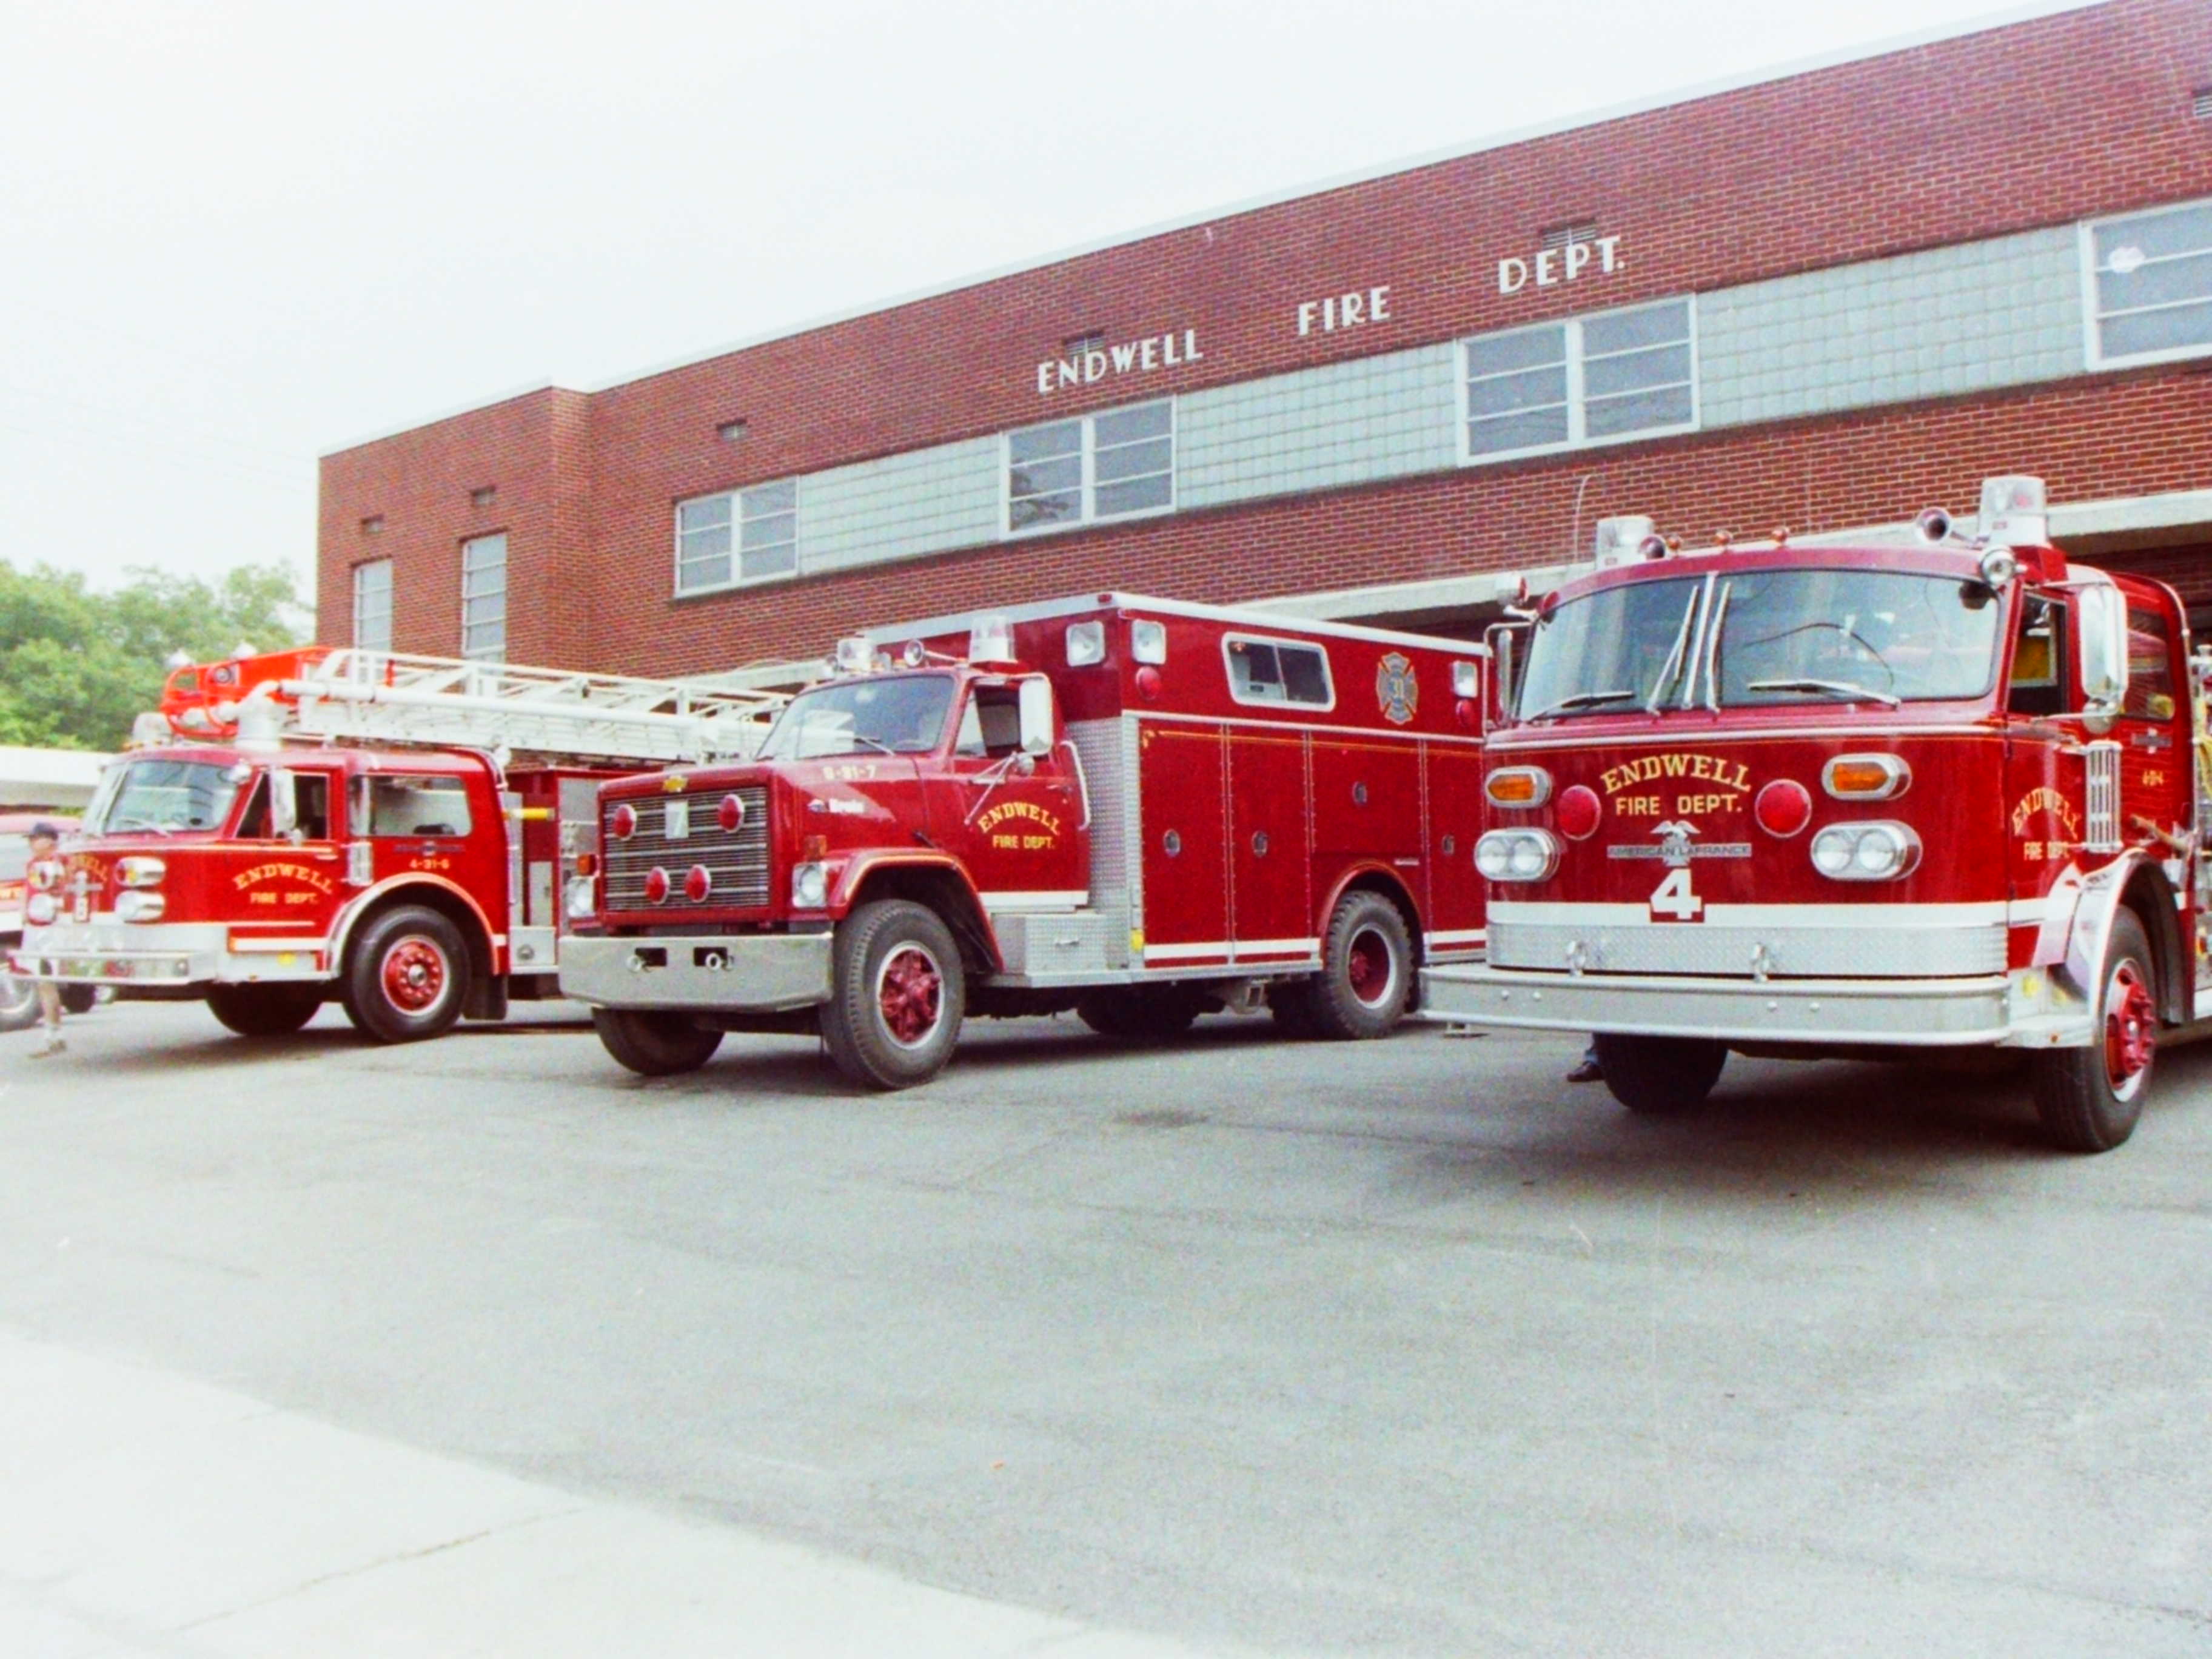 00-00-91  Other - Endwell - Station 1